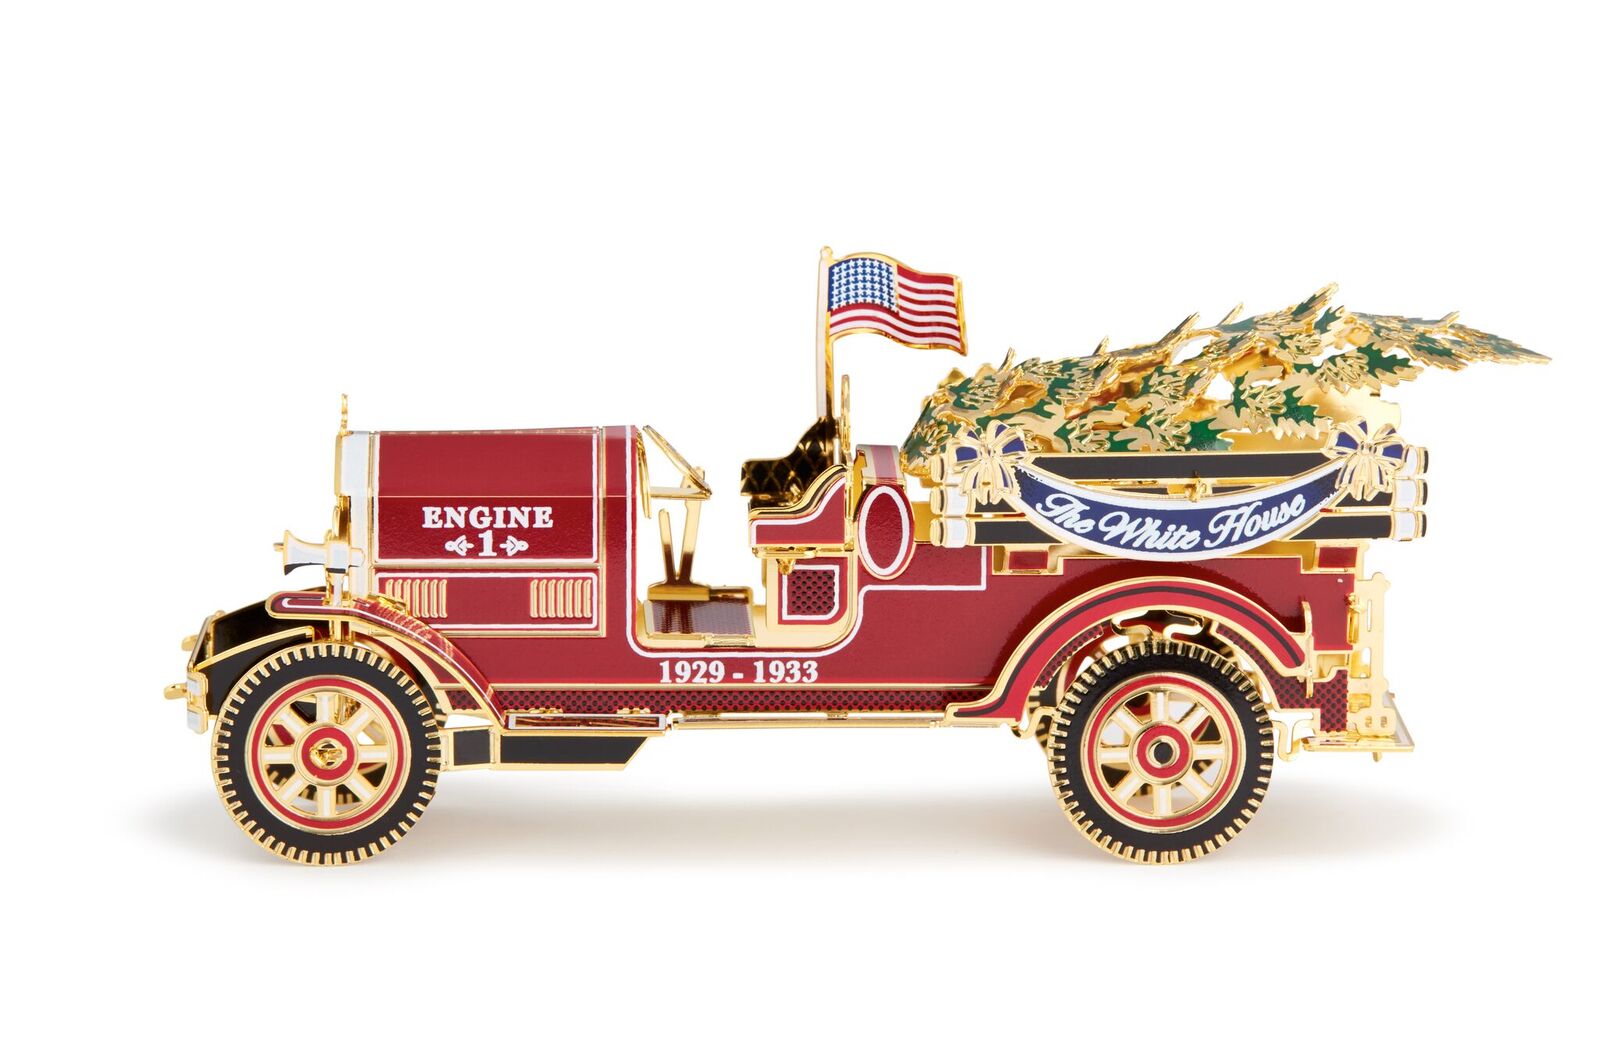 2016 White House ornament honors fire department